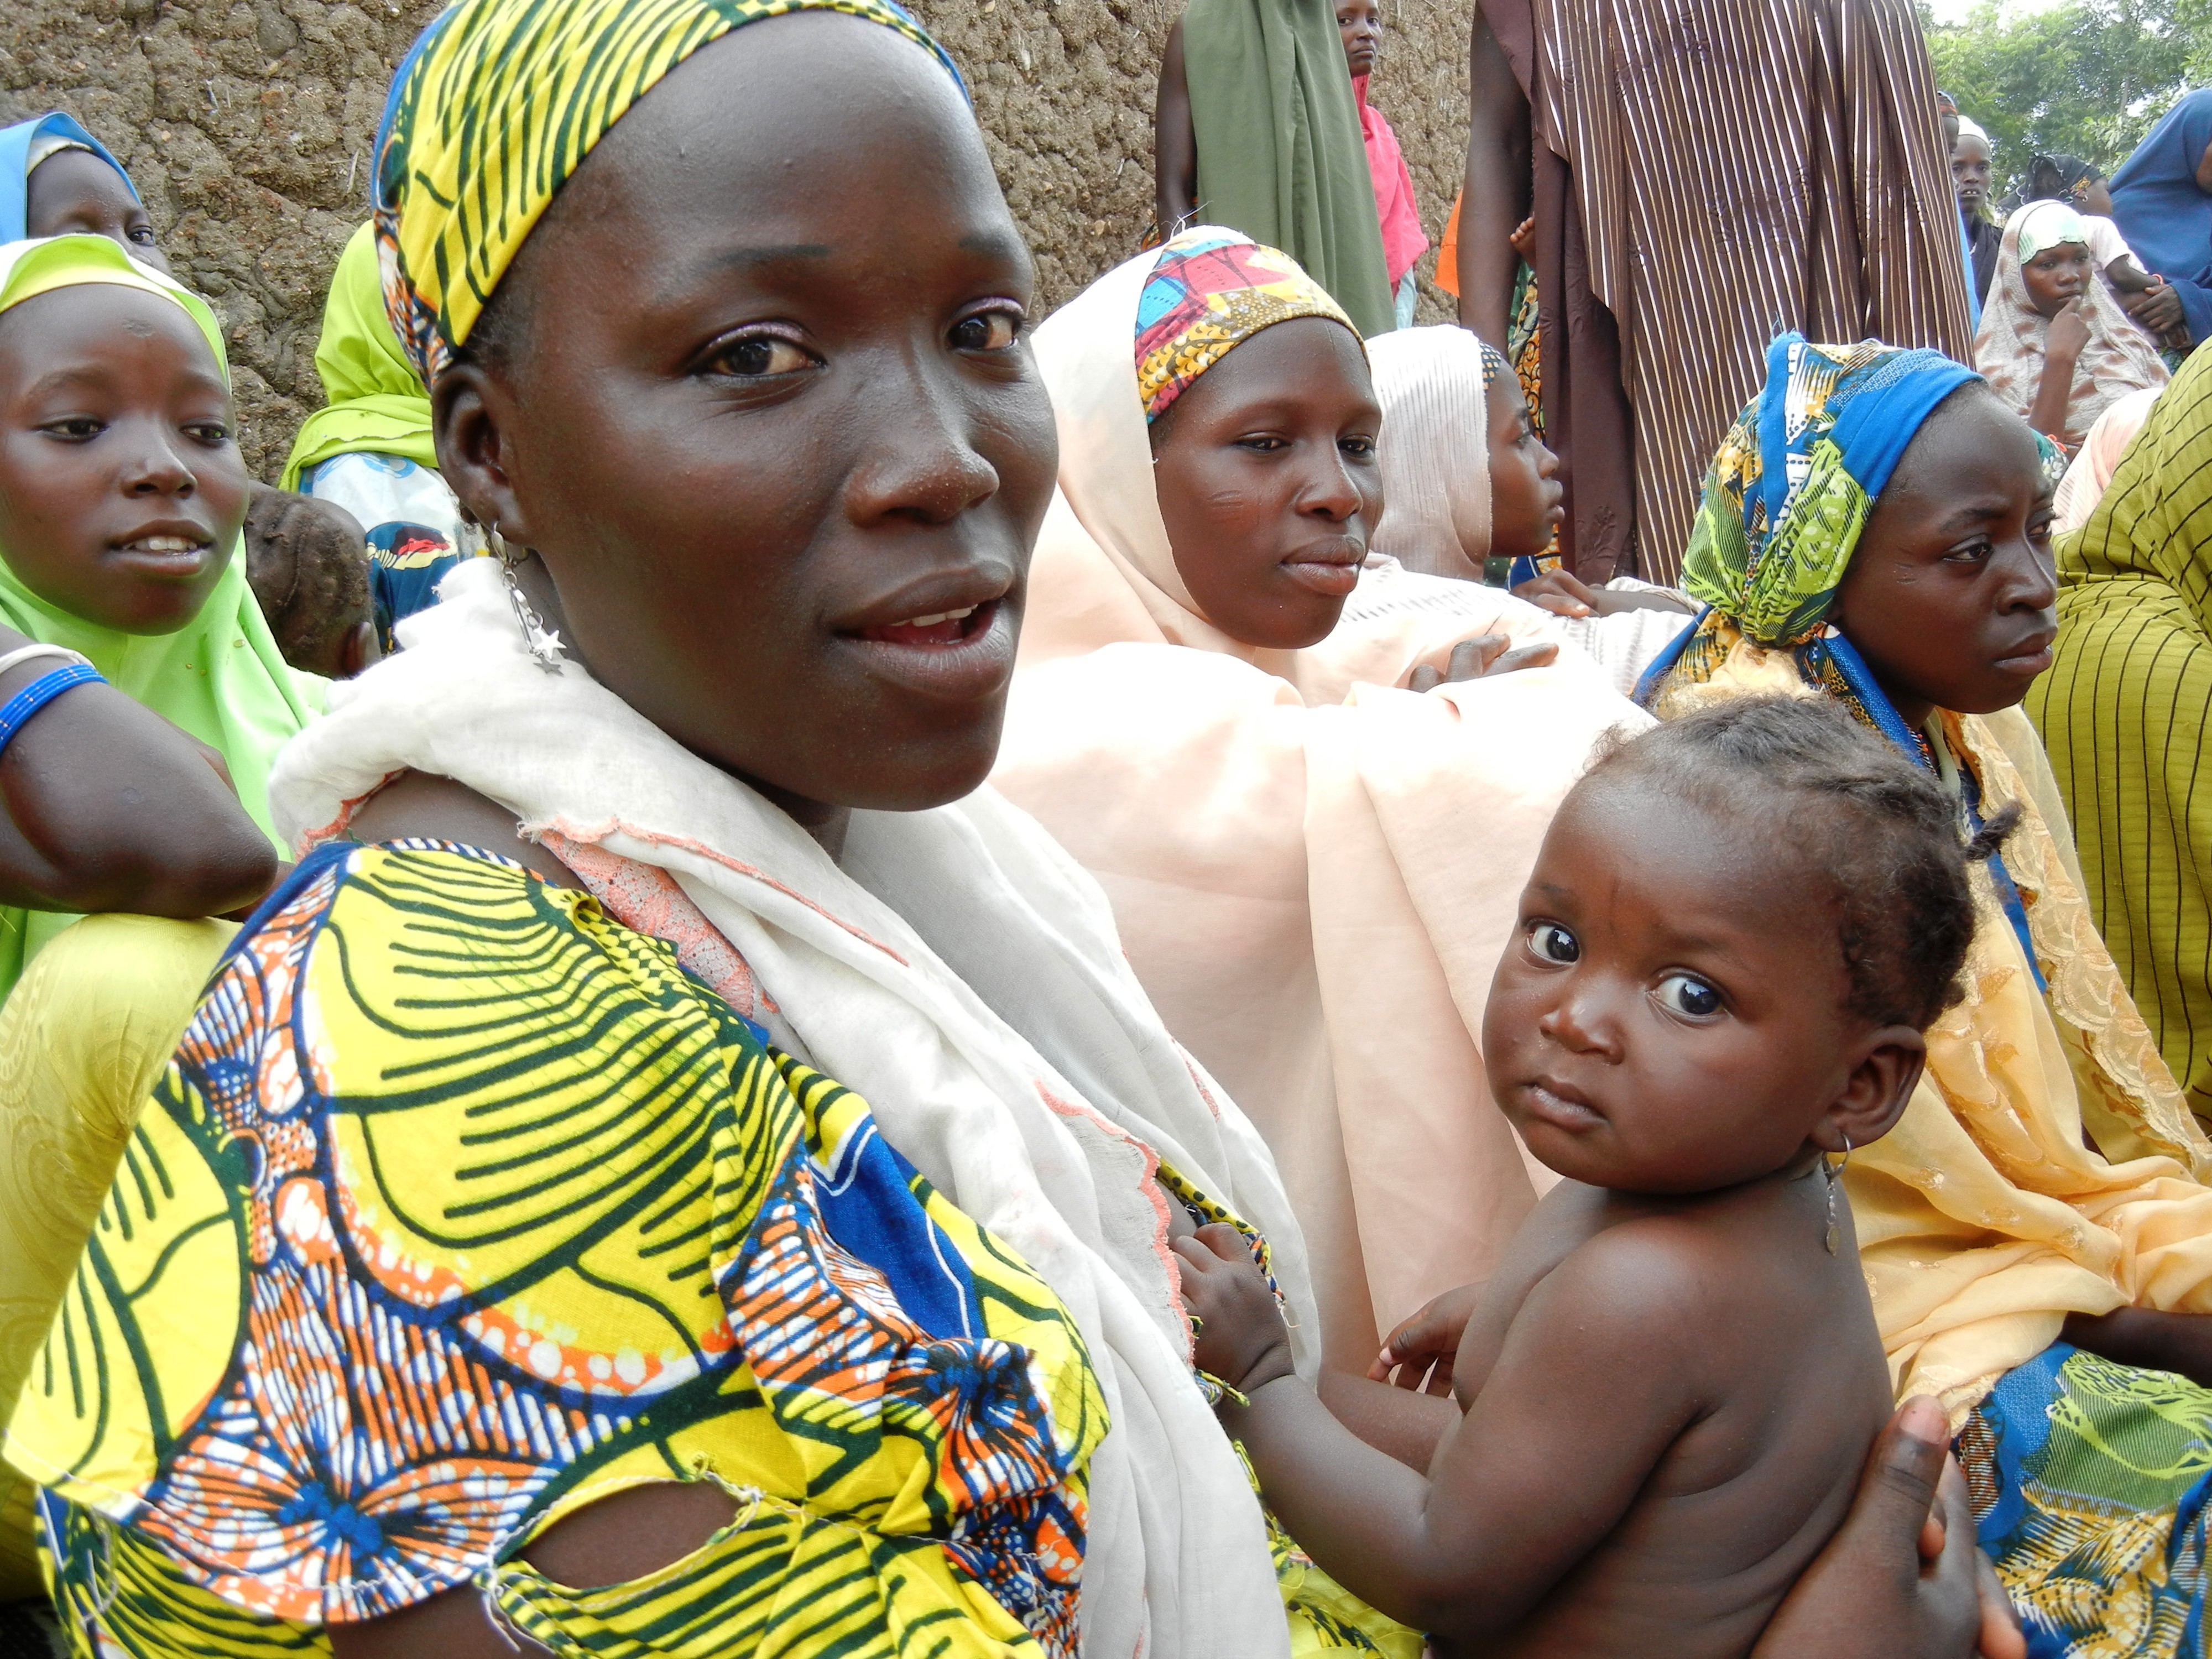 a_woman_attends_a_health_education_session_in_northern_nigeria_8406369172.jpg